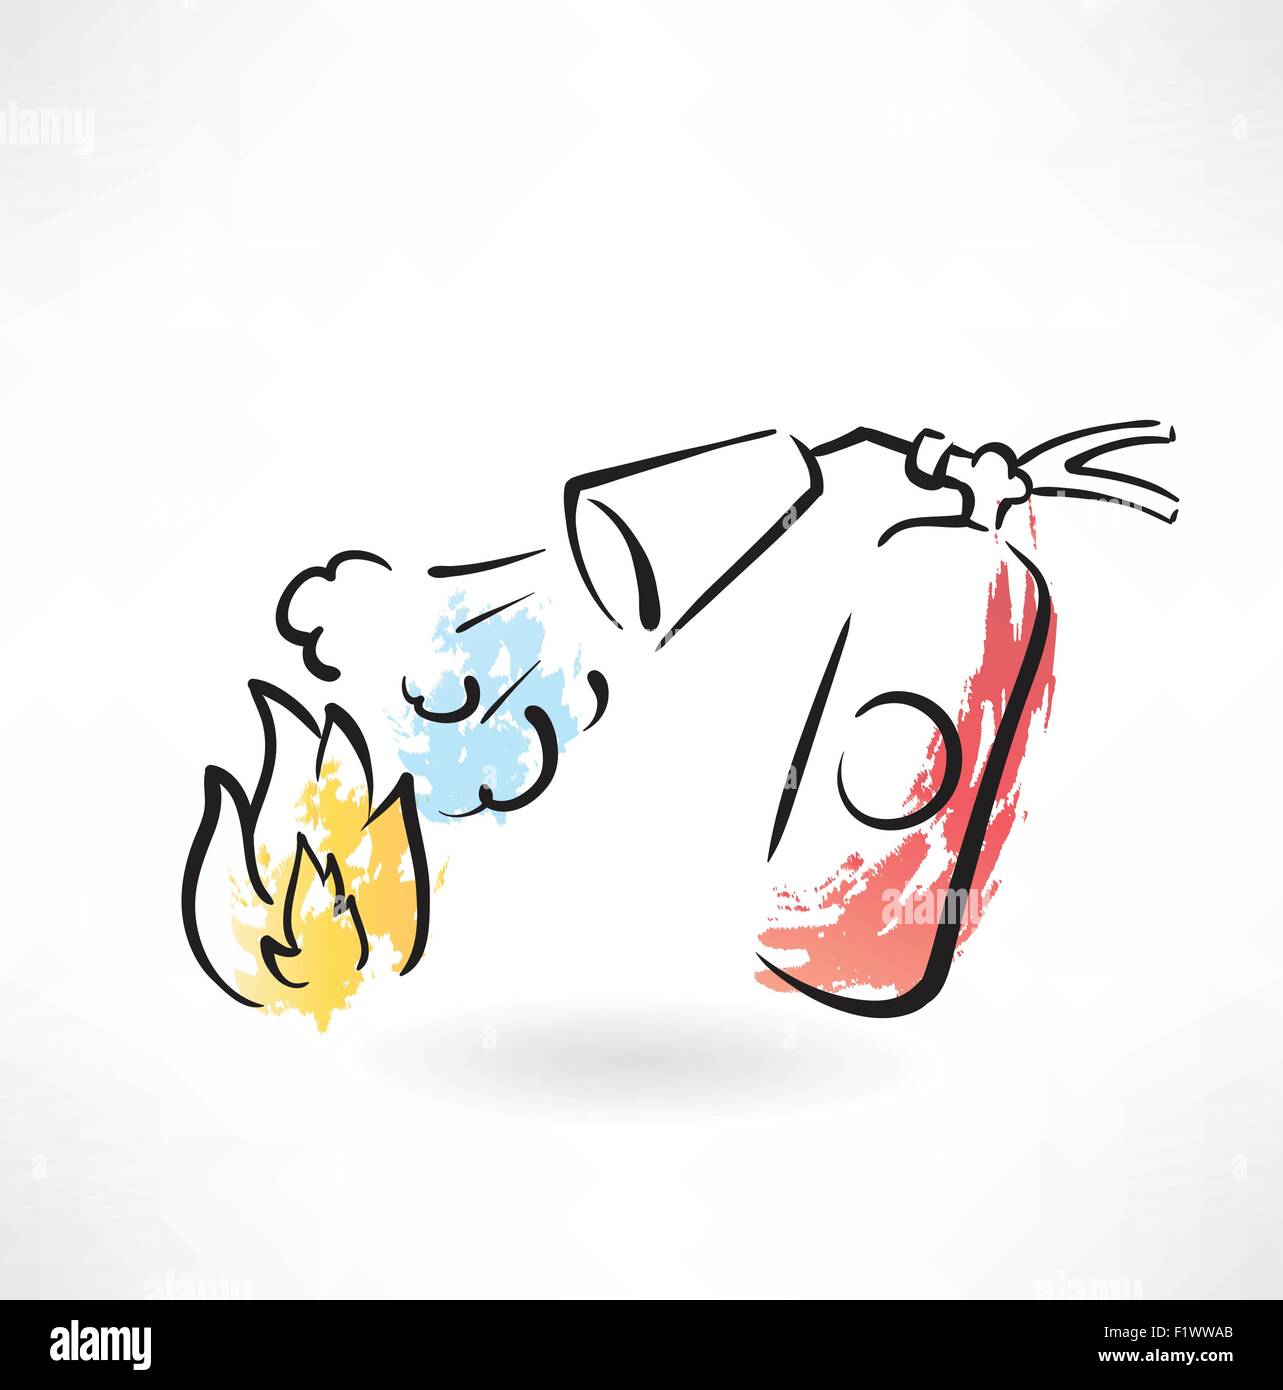 fire extinguisher grunge icon Stock Vector